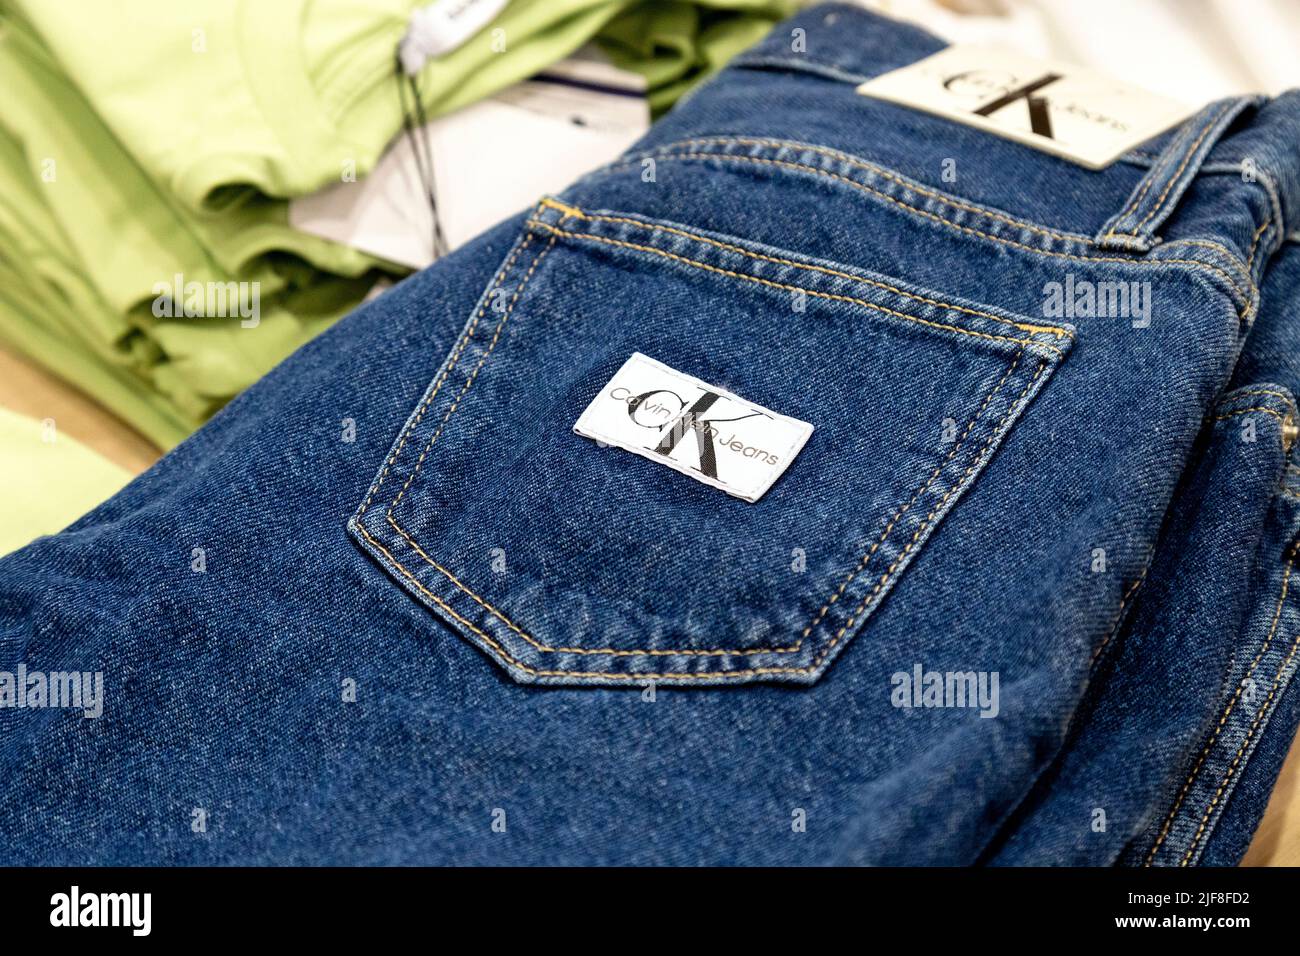 Calvin Klein blue jeans at a shop display Stock Photo